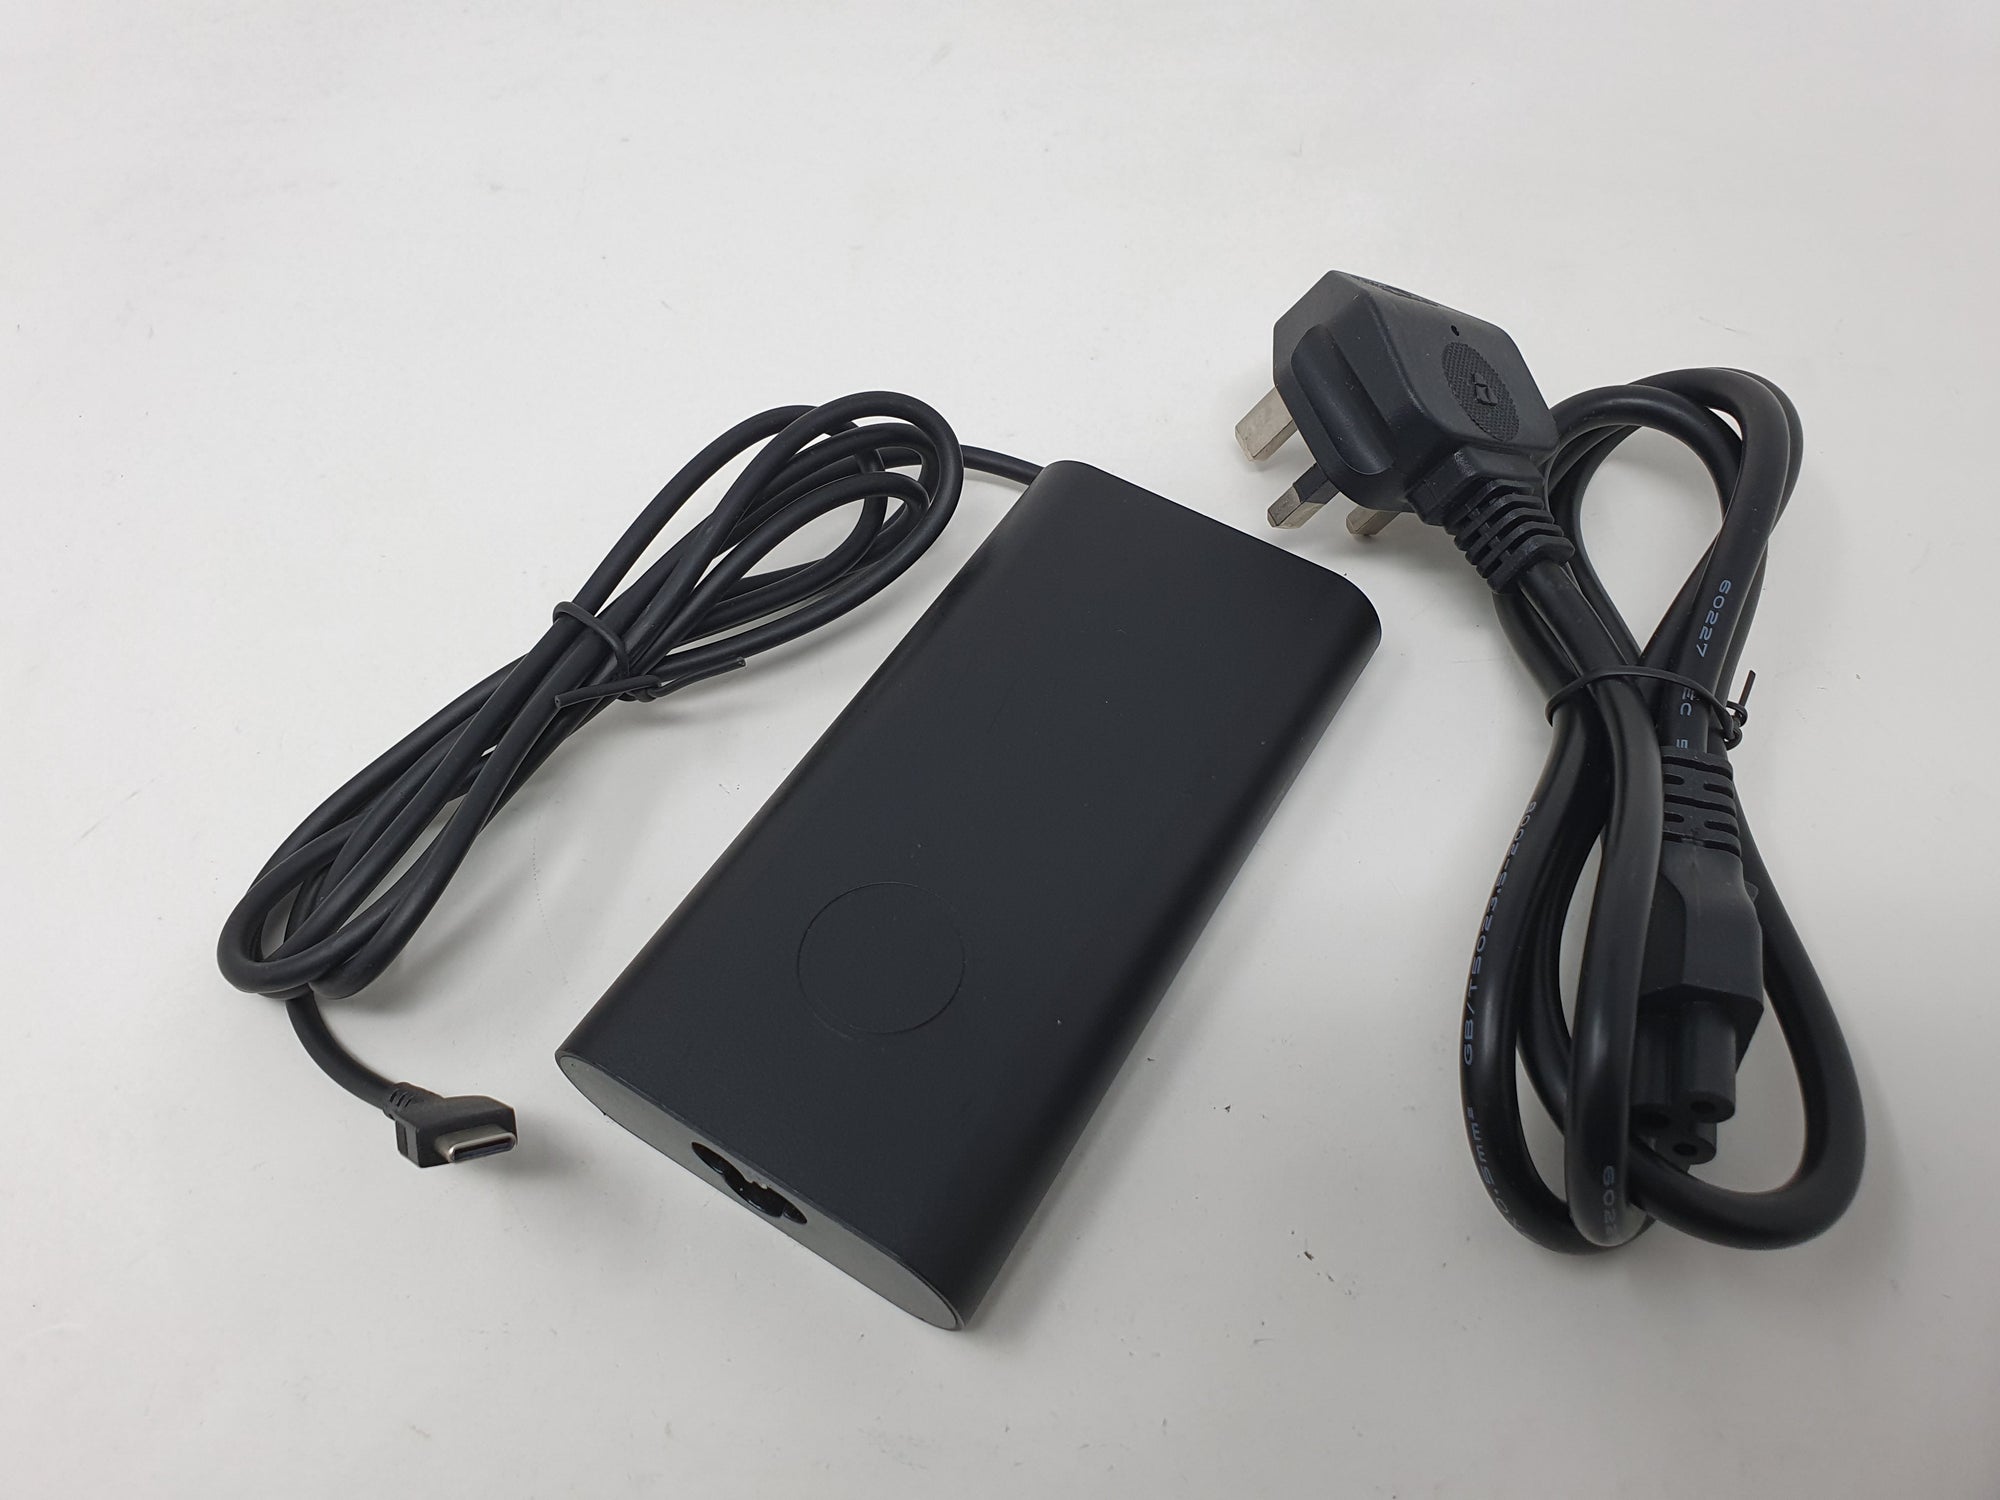 USB C Type-C Laptop Charger Power Supply Adapter for DELL Laptop